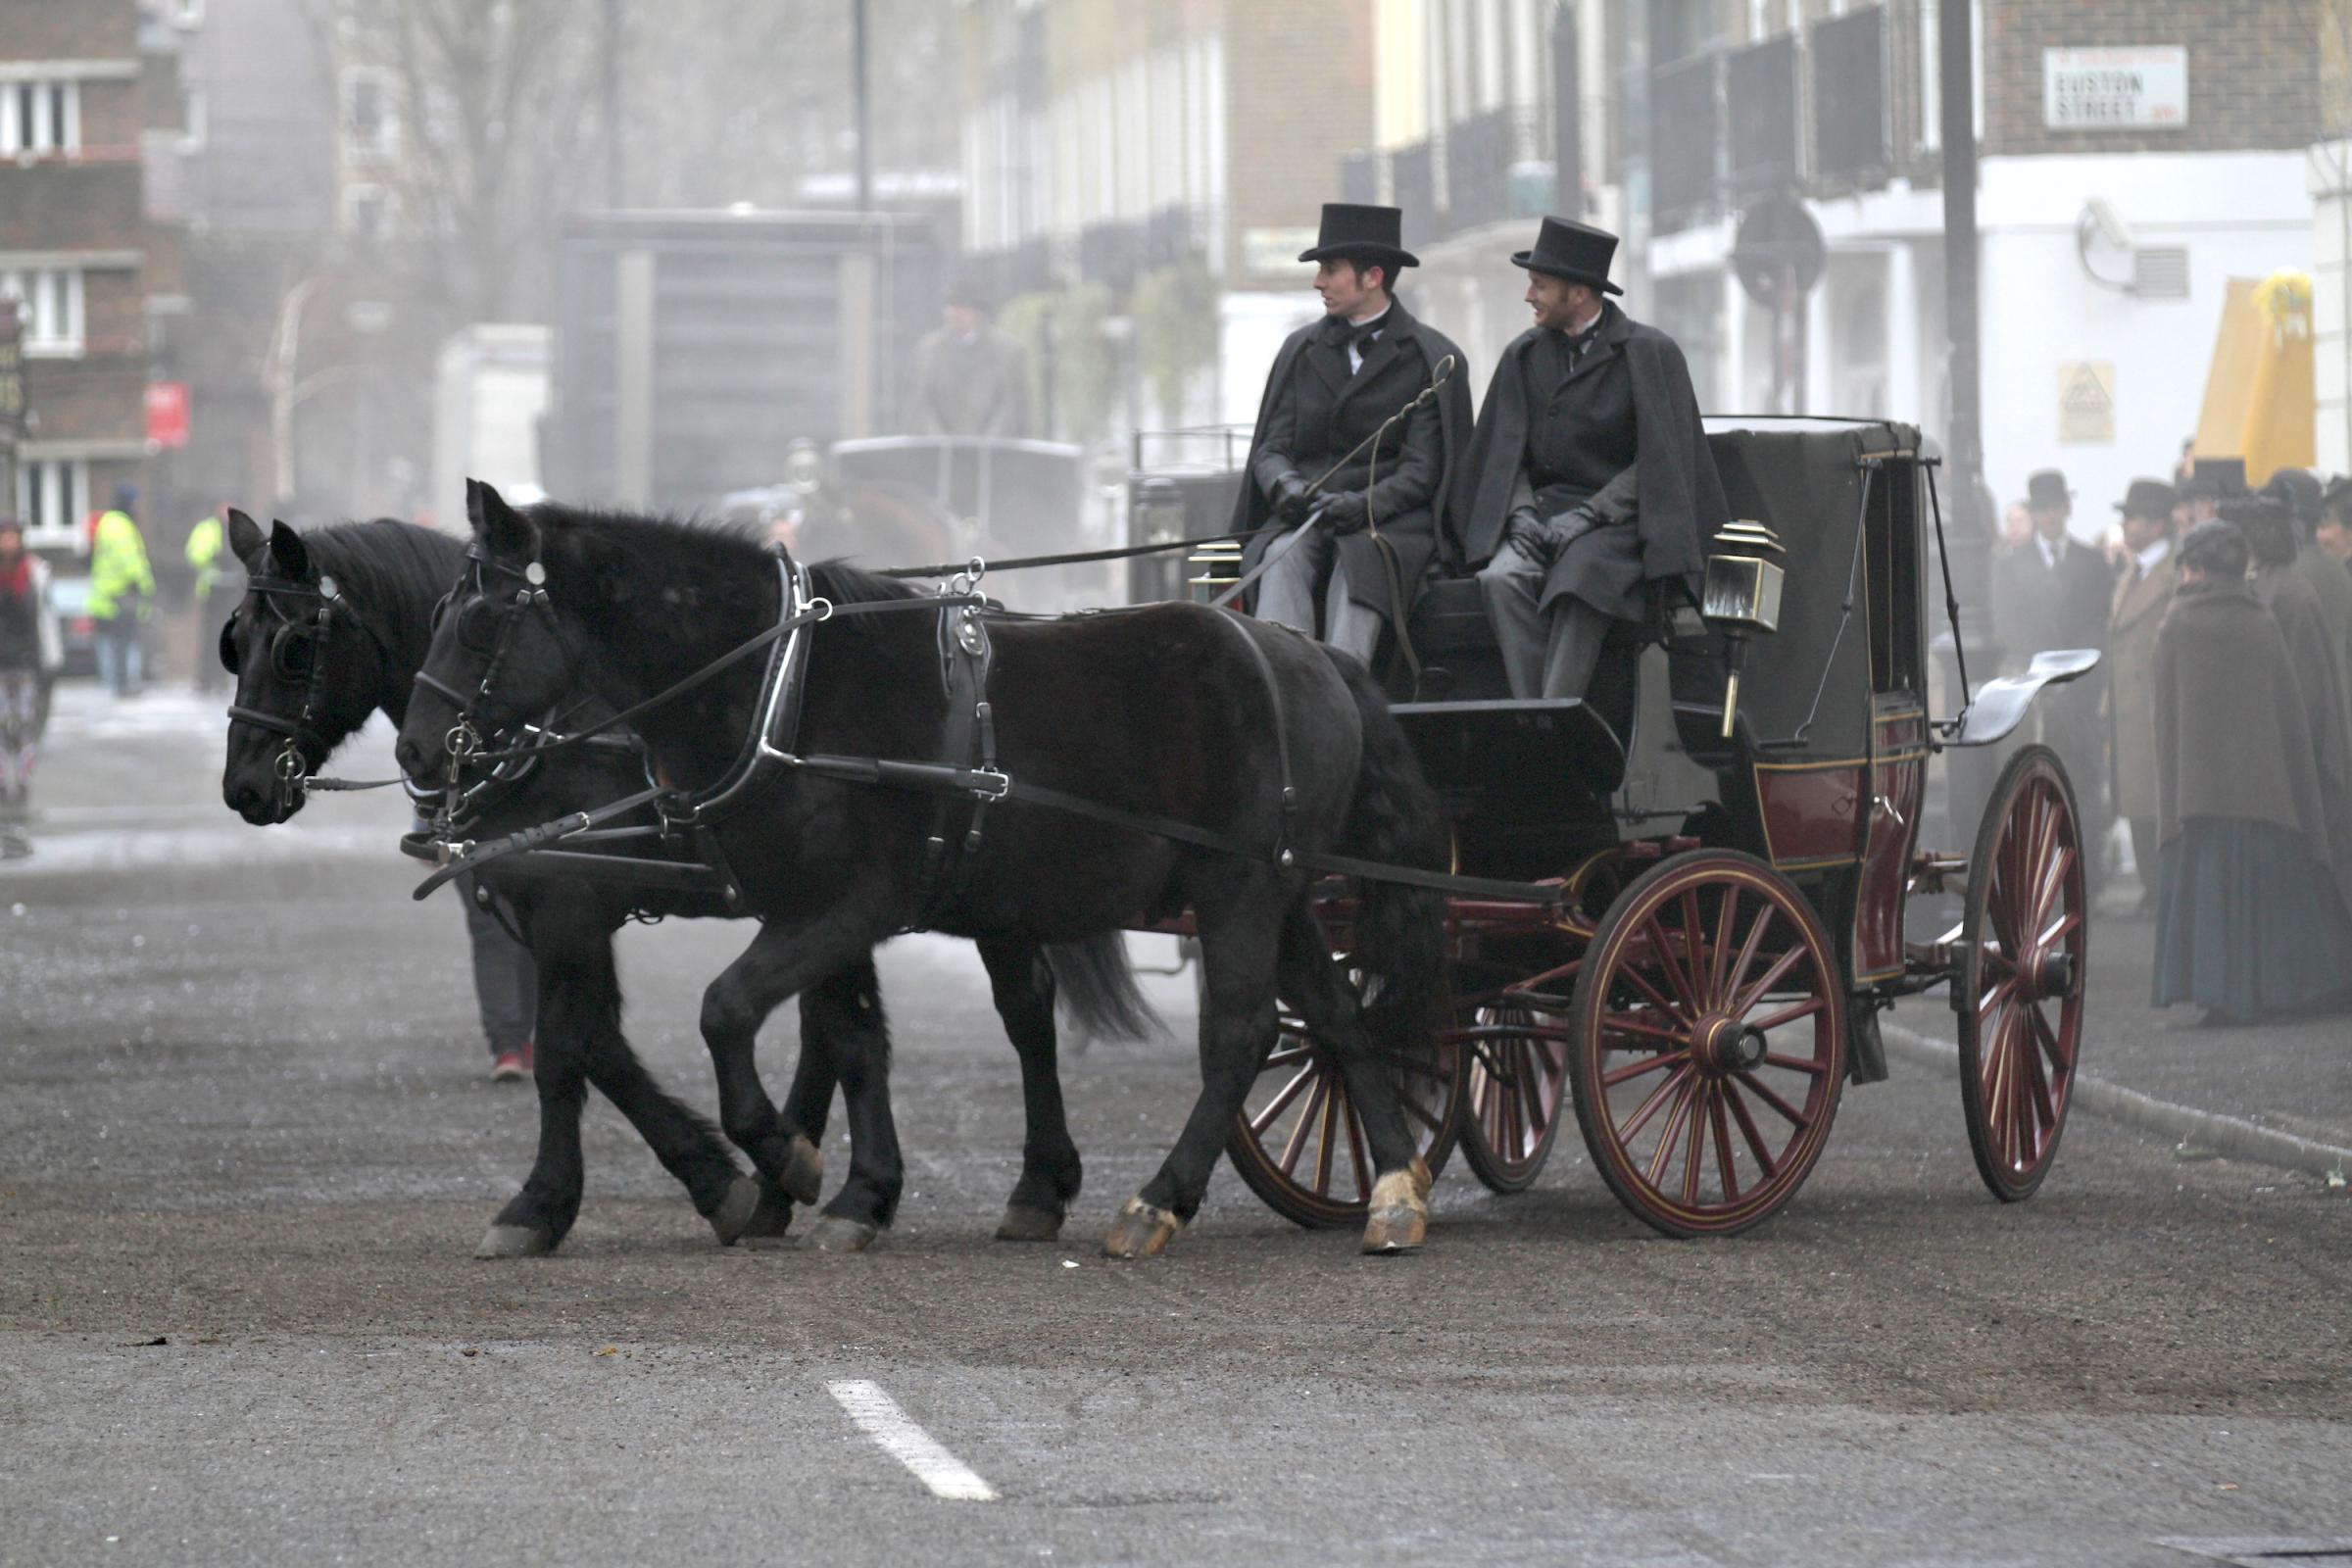 Sherlock filming general view on February 7, 2015 in London, England